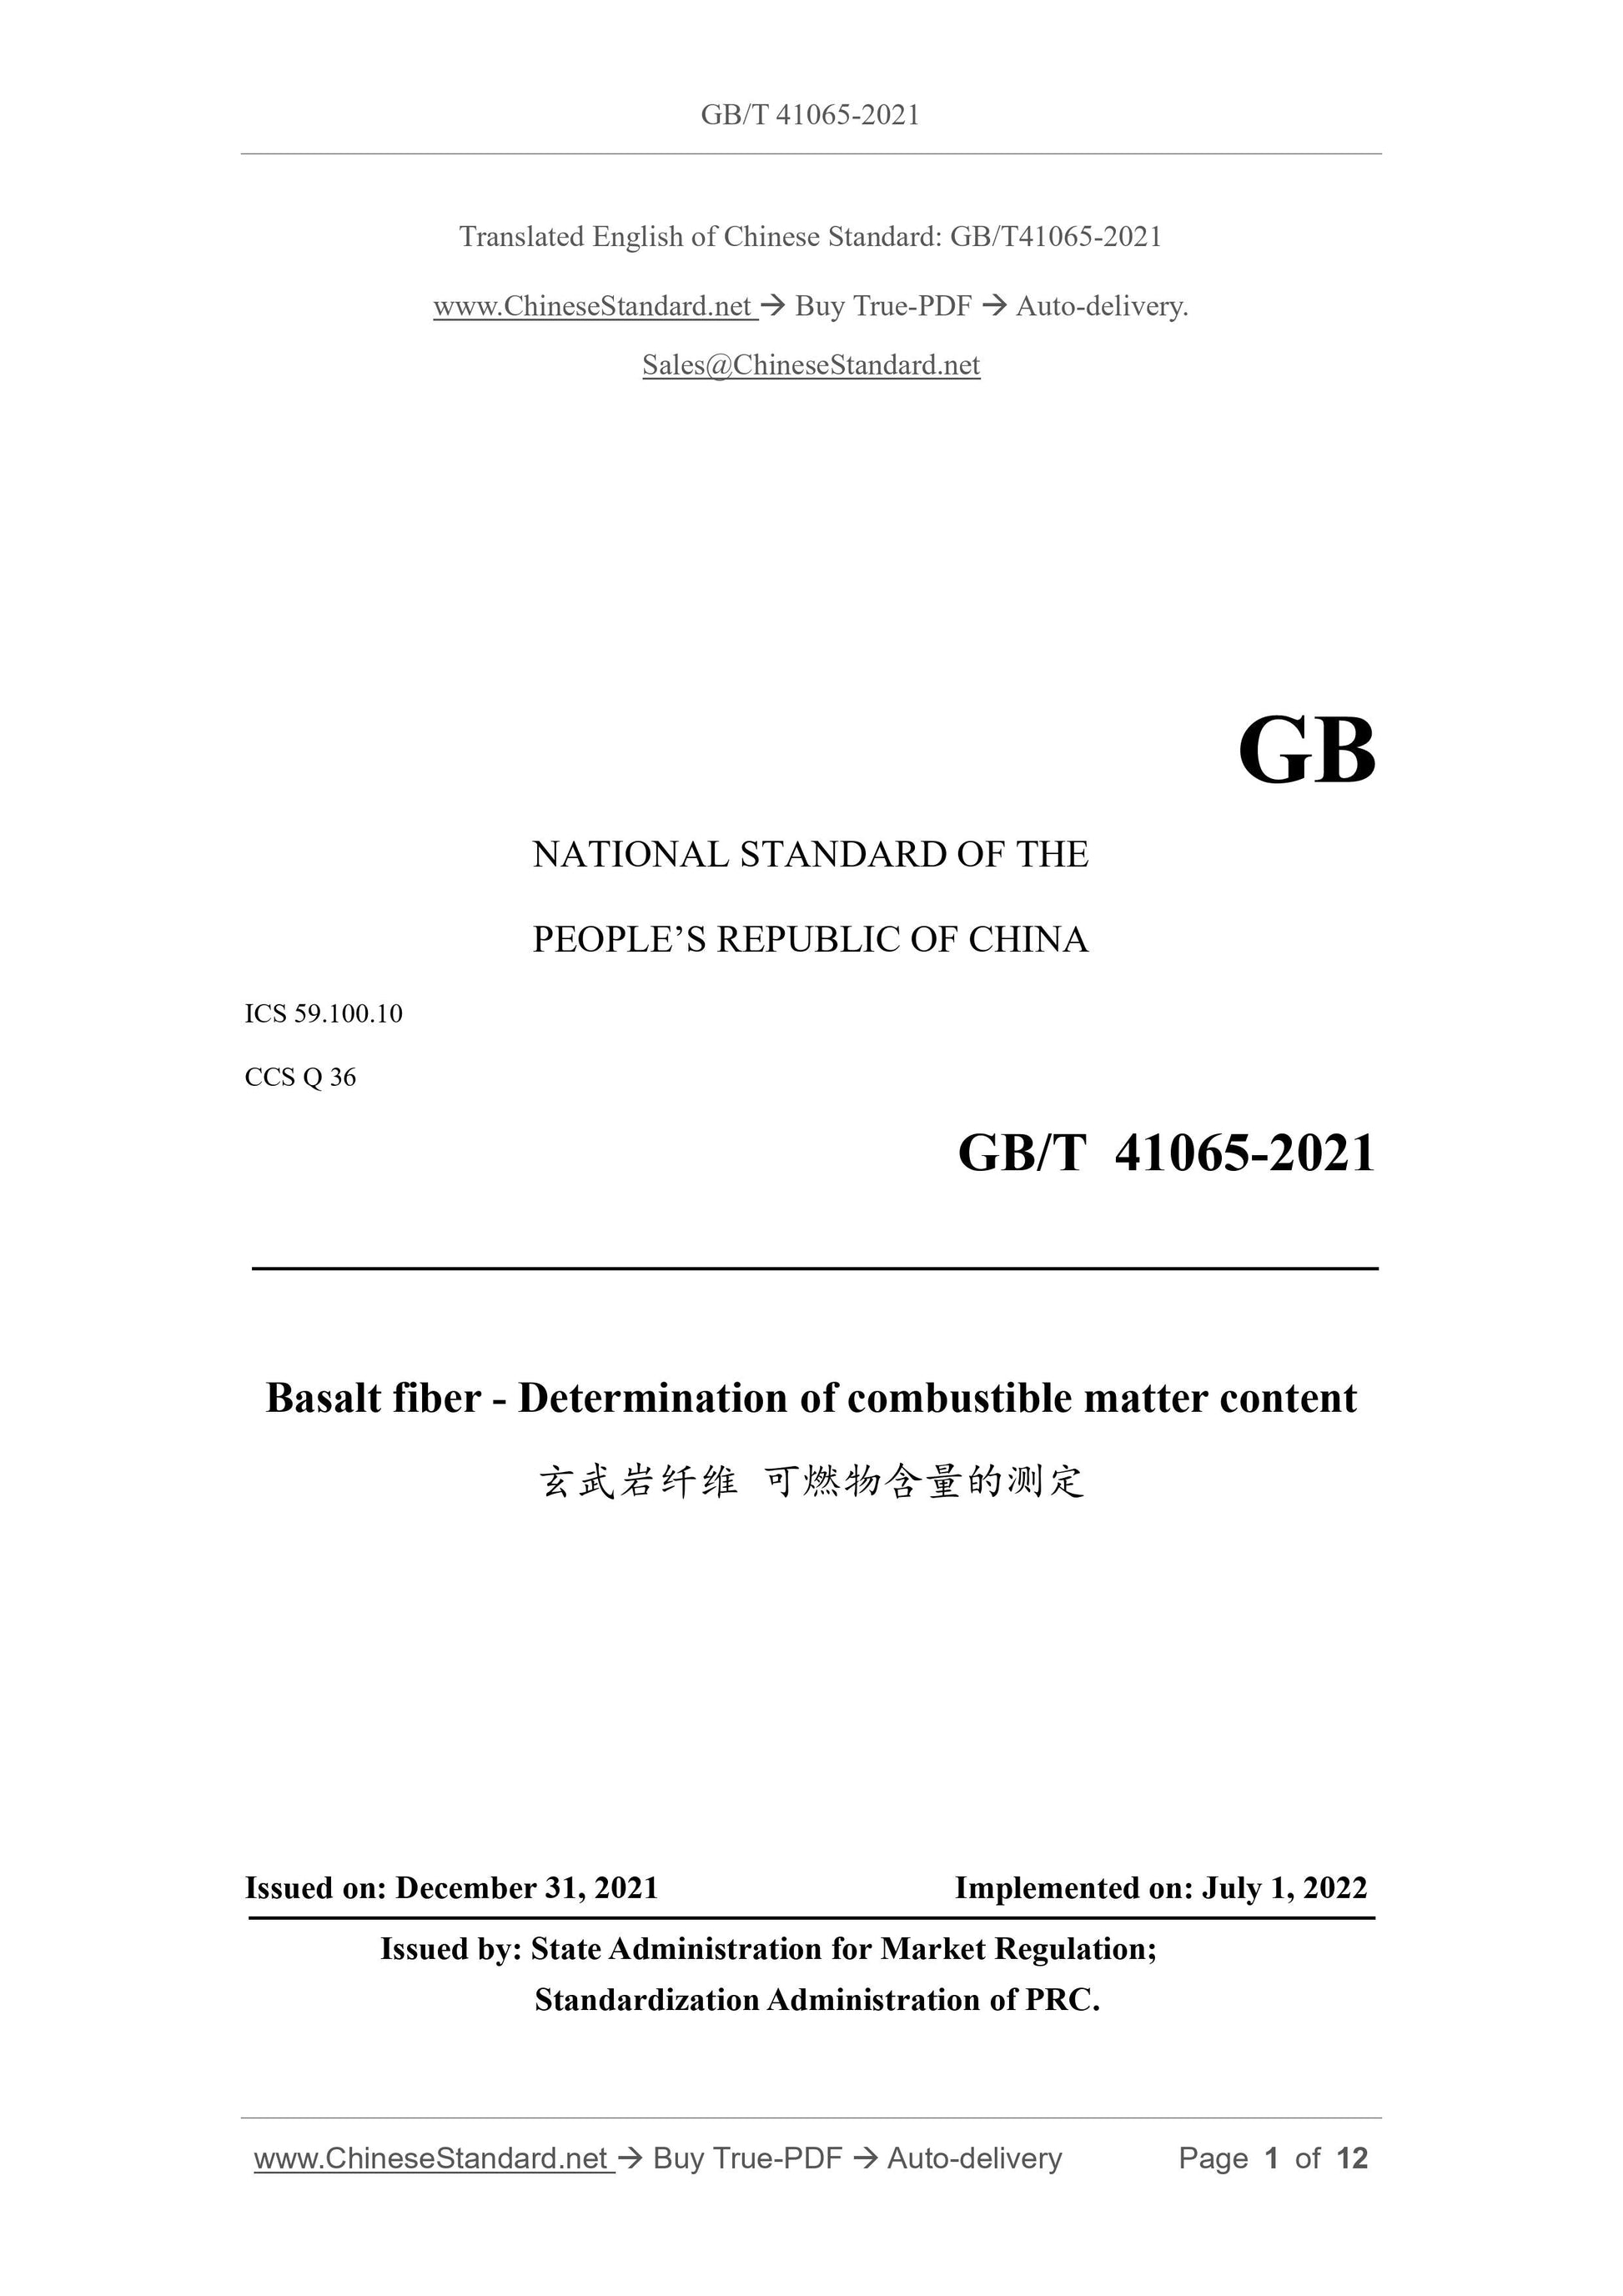 GB/T 41065-2021 Page 1